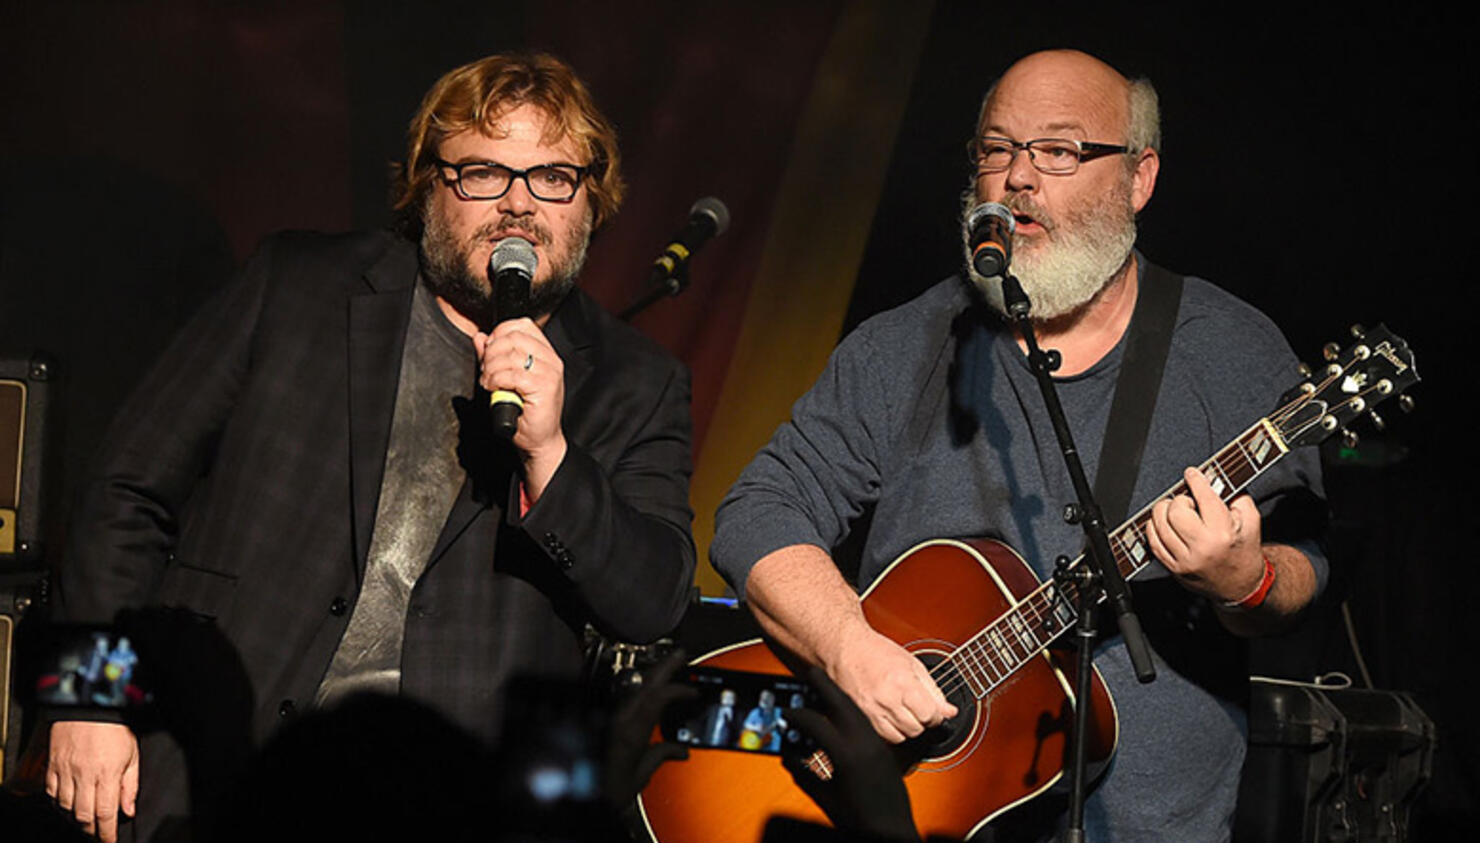 Tenacious D Announce First U.S. Tour in 5 Years